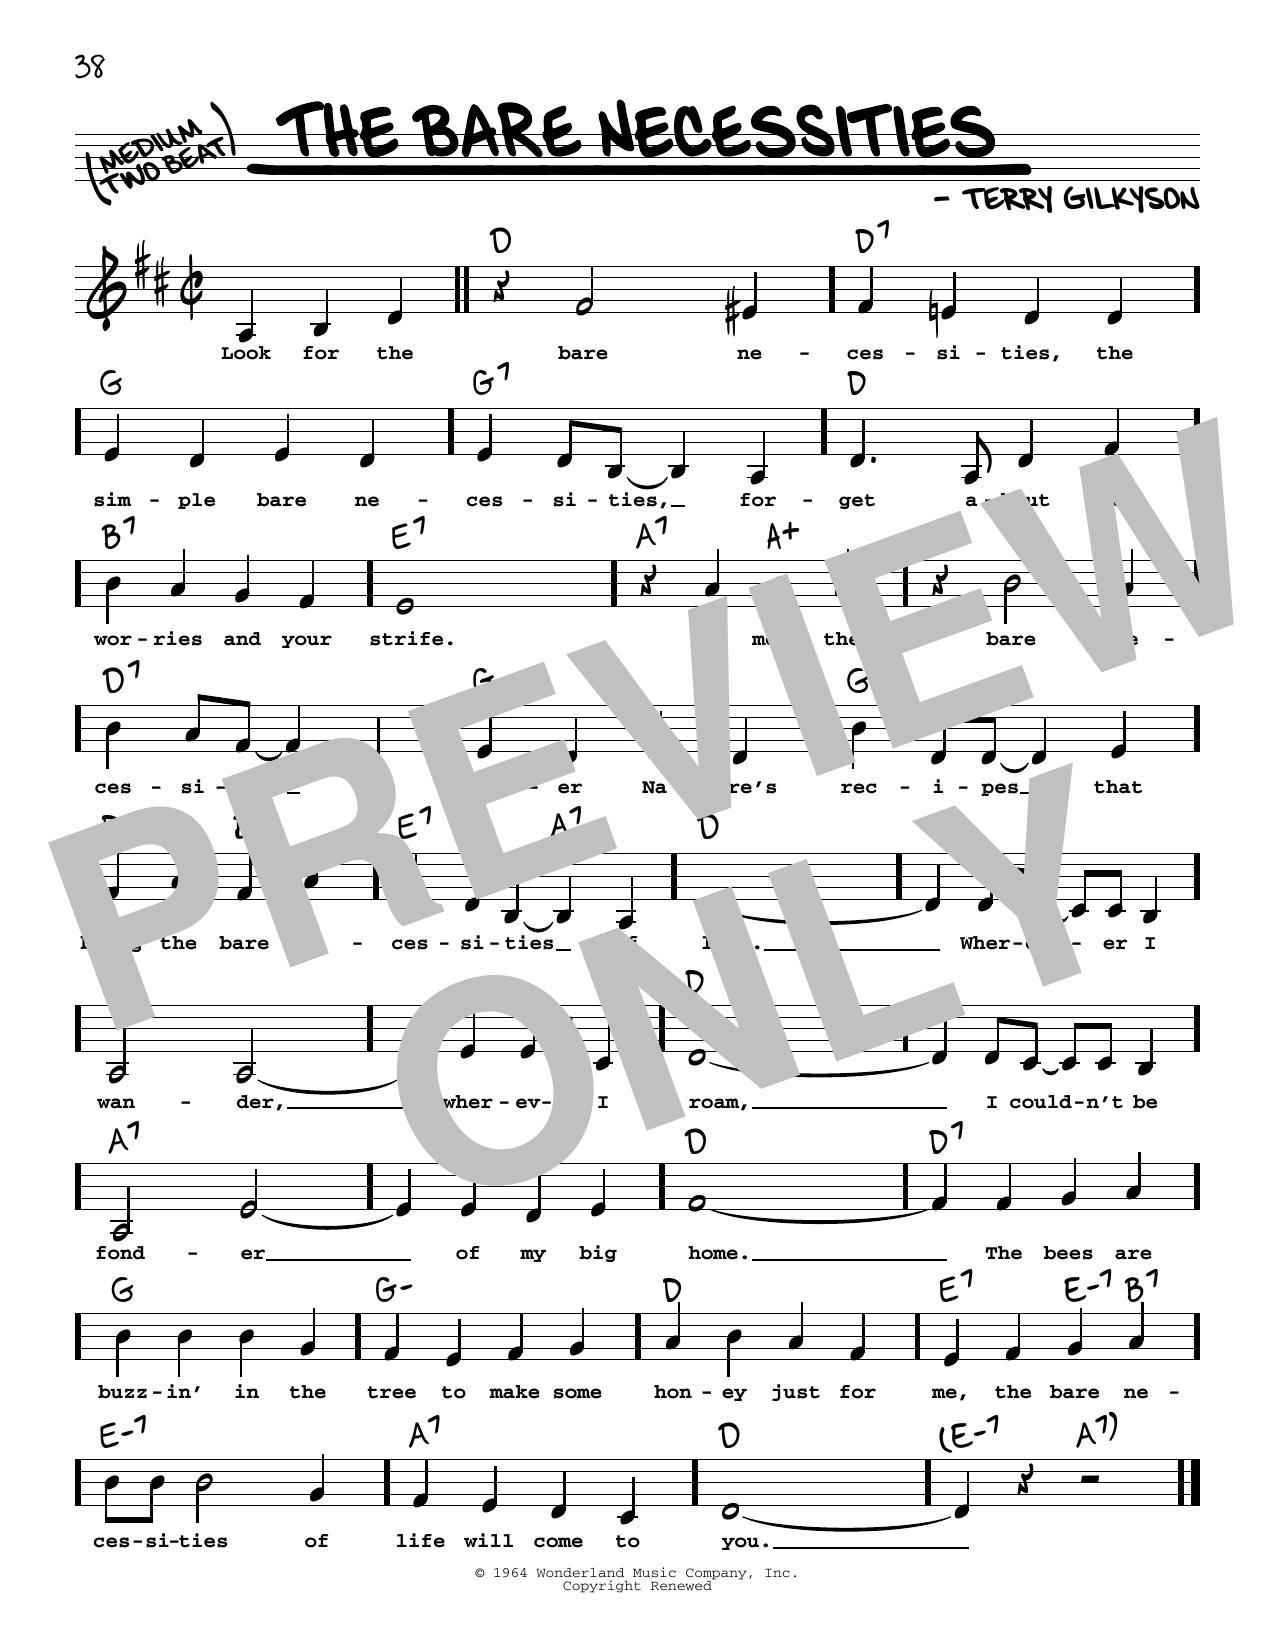 Download Terry Gilkyson The Bare Necessities (Low Voice) (from Sheet Music